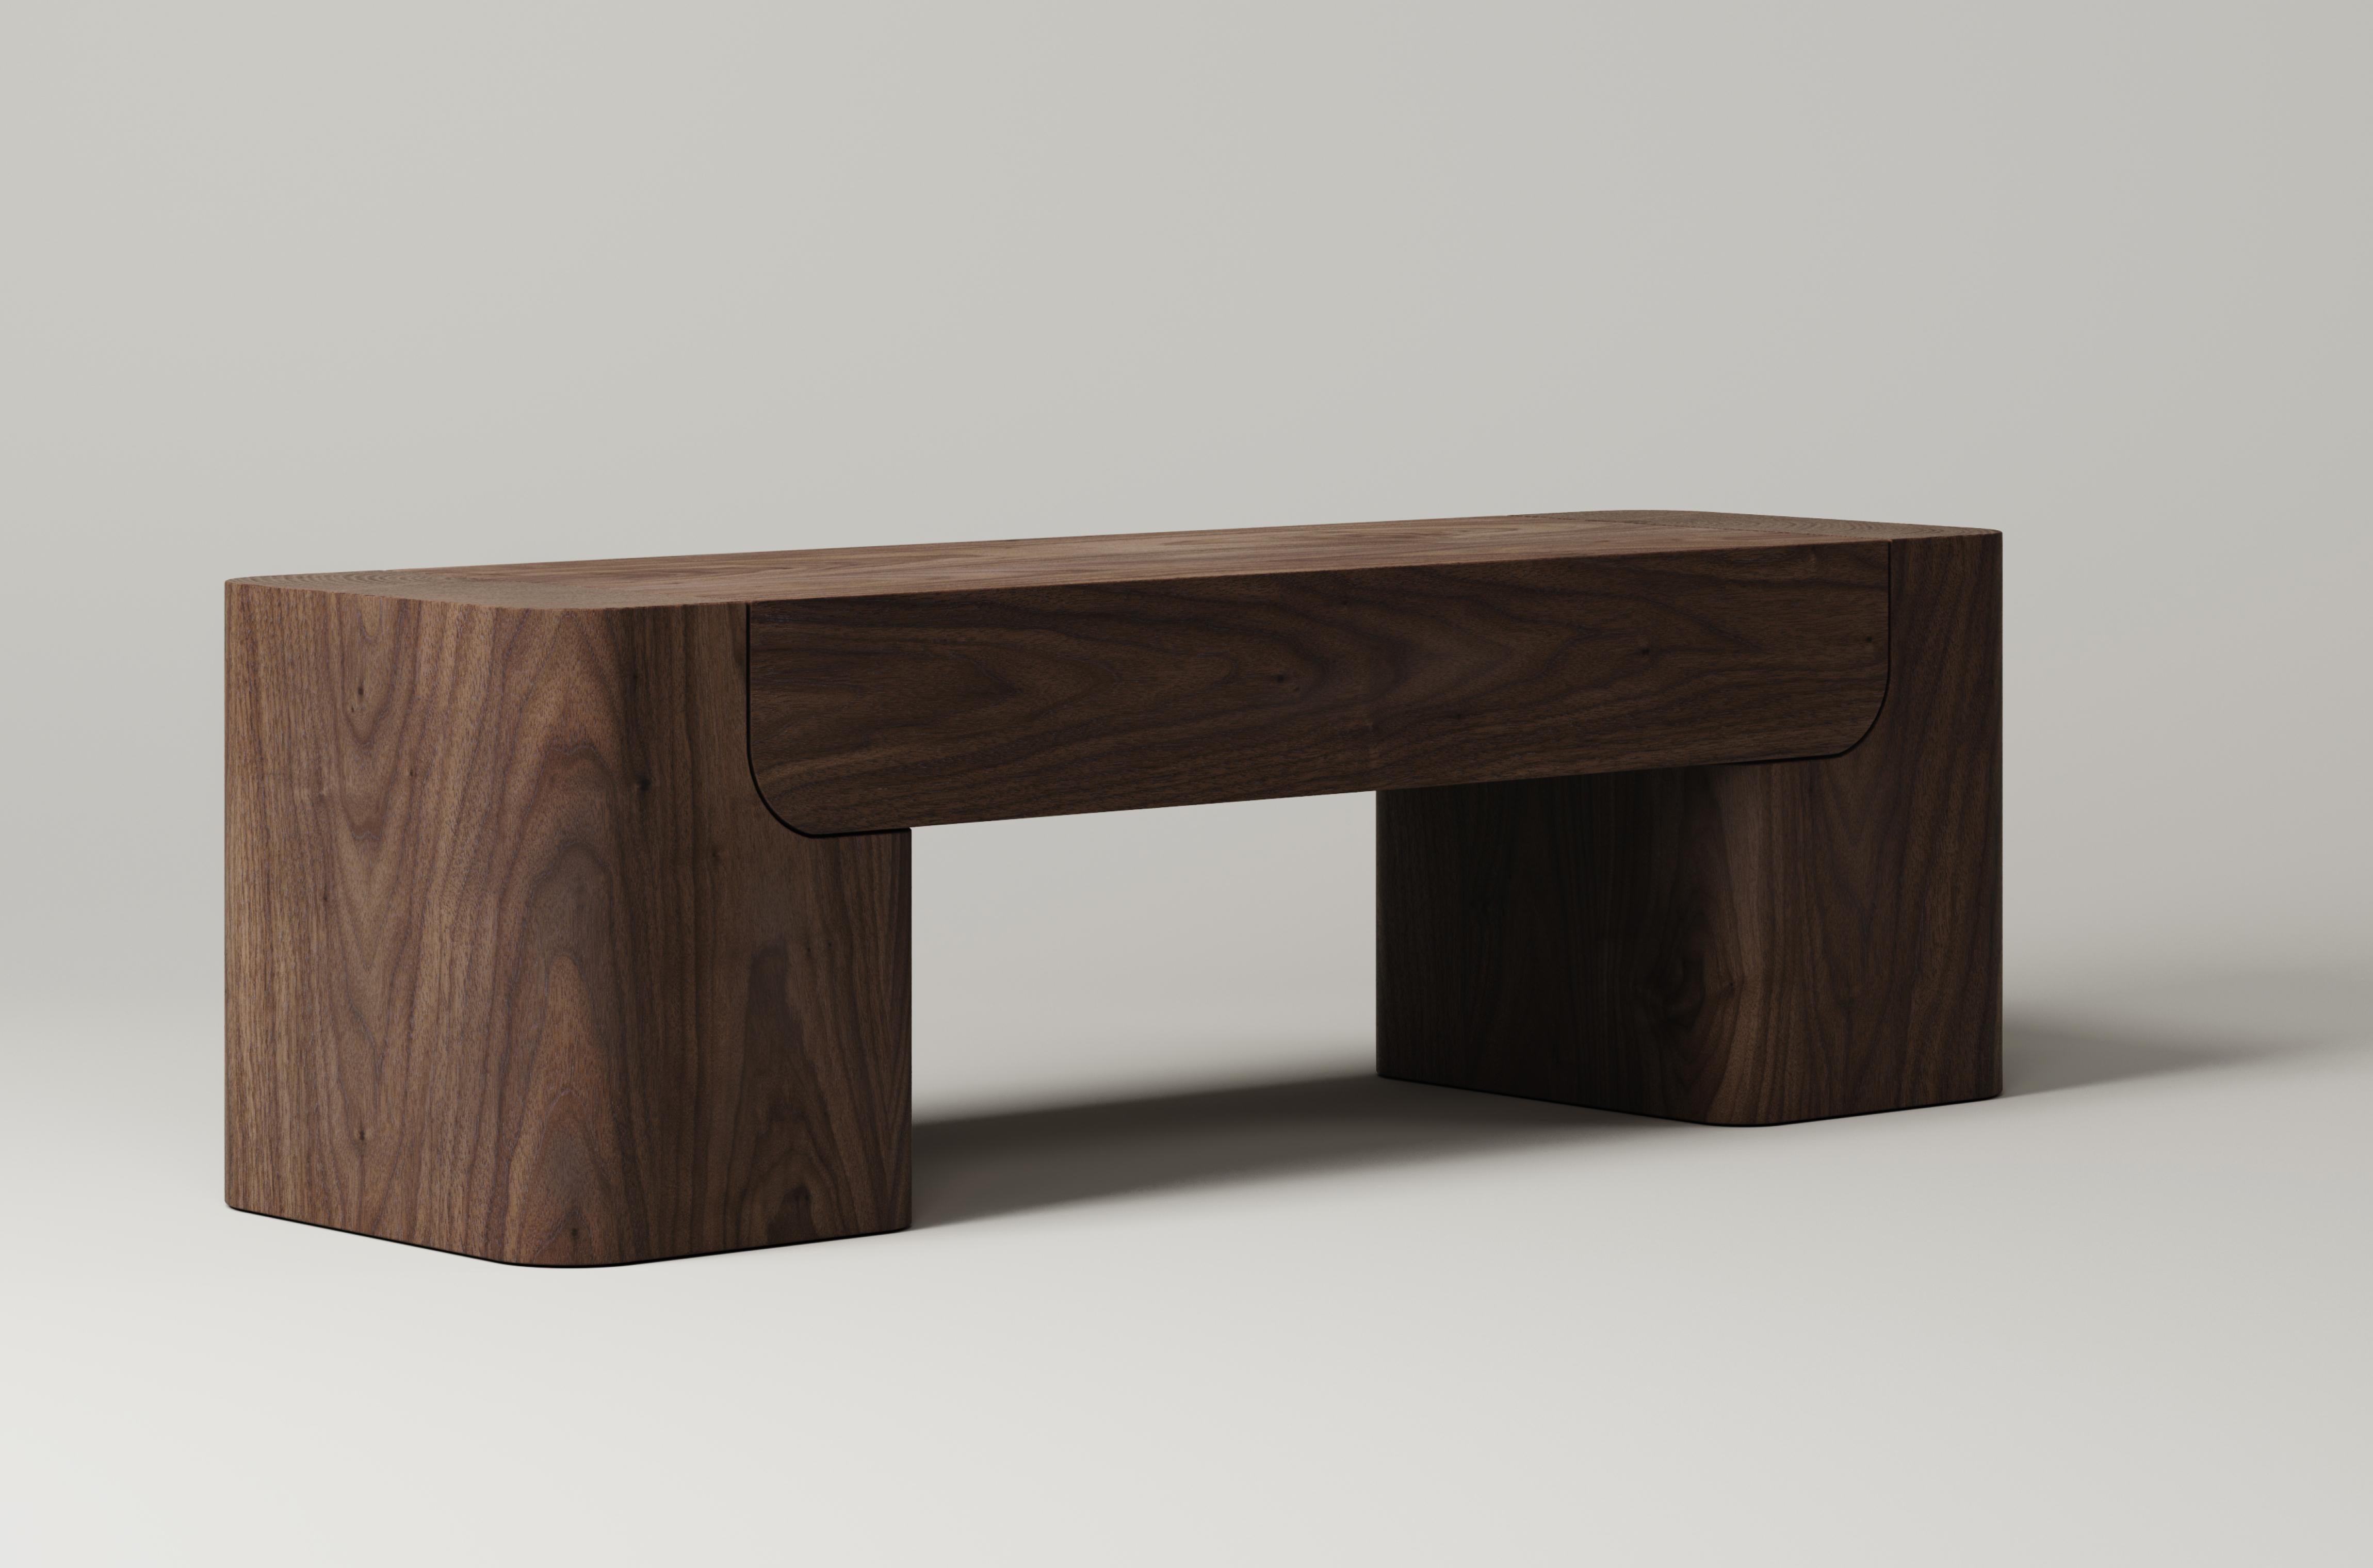 M_005 Walnut Bench by Monolith Studio
Signed and Numbered.
Dimensions: D 40 x W 132 x H 40 cm.
Materials: Walnut.

Available in travertine, walnut, white oak and lava rock.  Please contact us. 

Monolith, founded in 2022 by Marc Personick, leans on